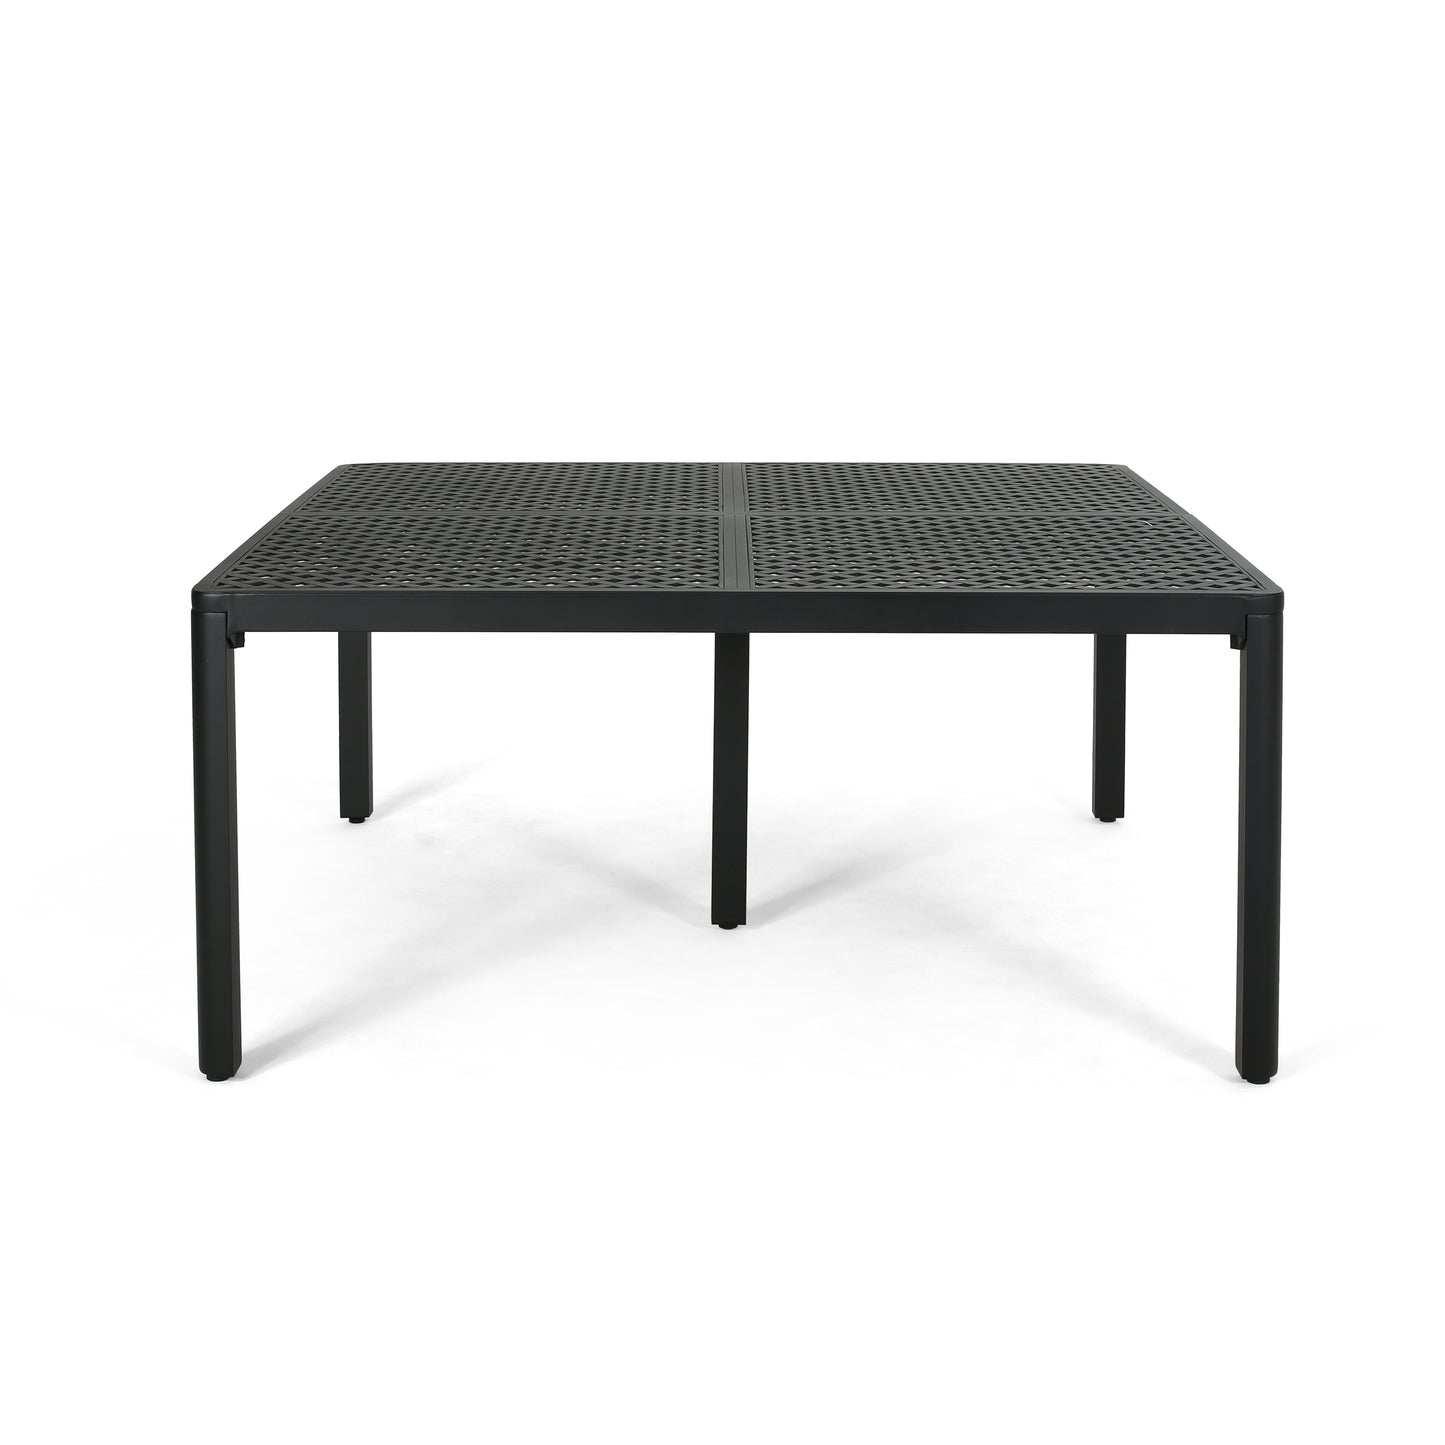 Frisco Modern Aluminum Dining Table with Woven Accents